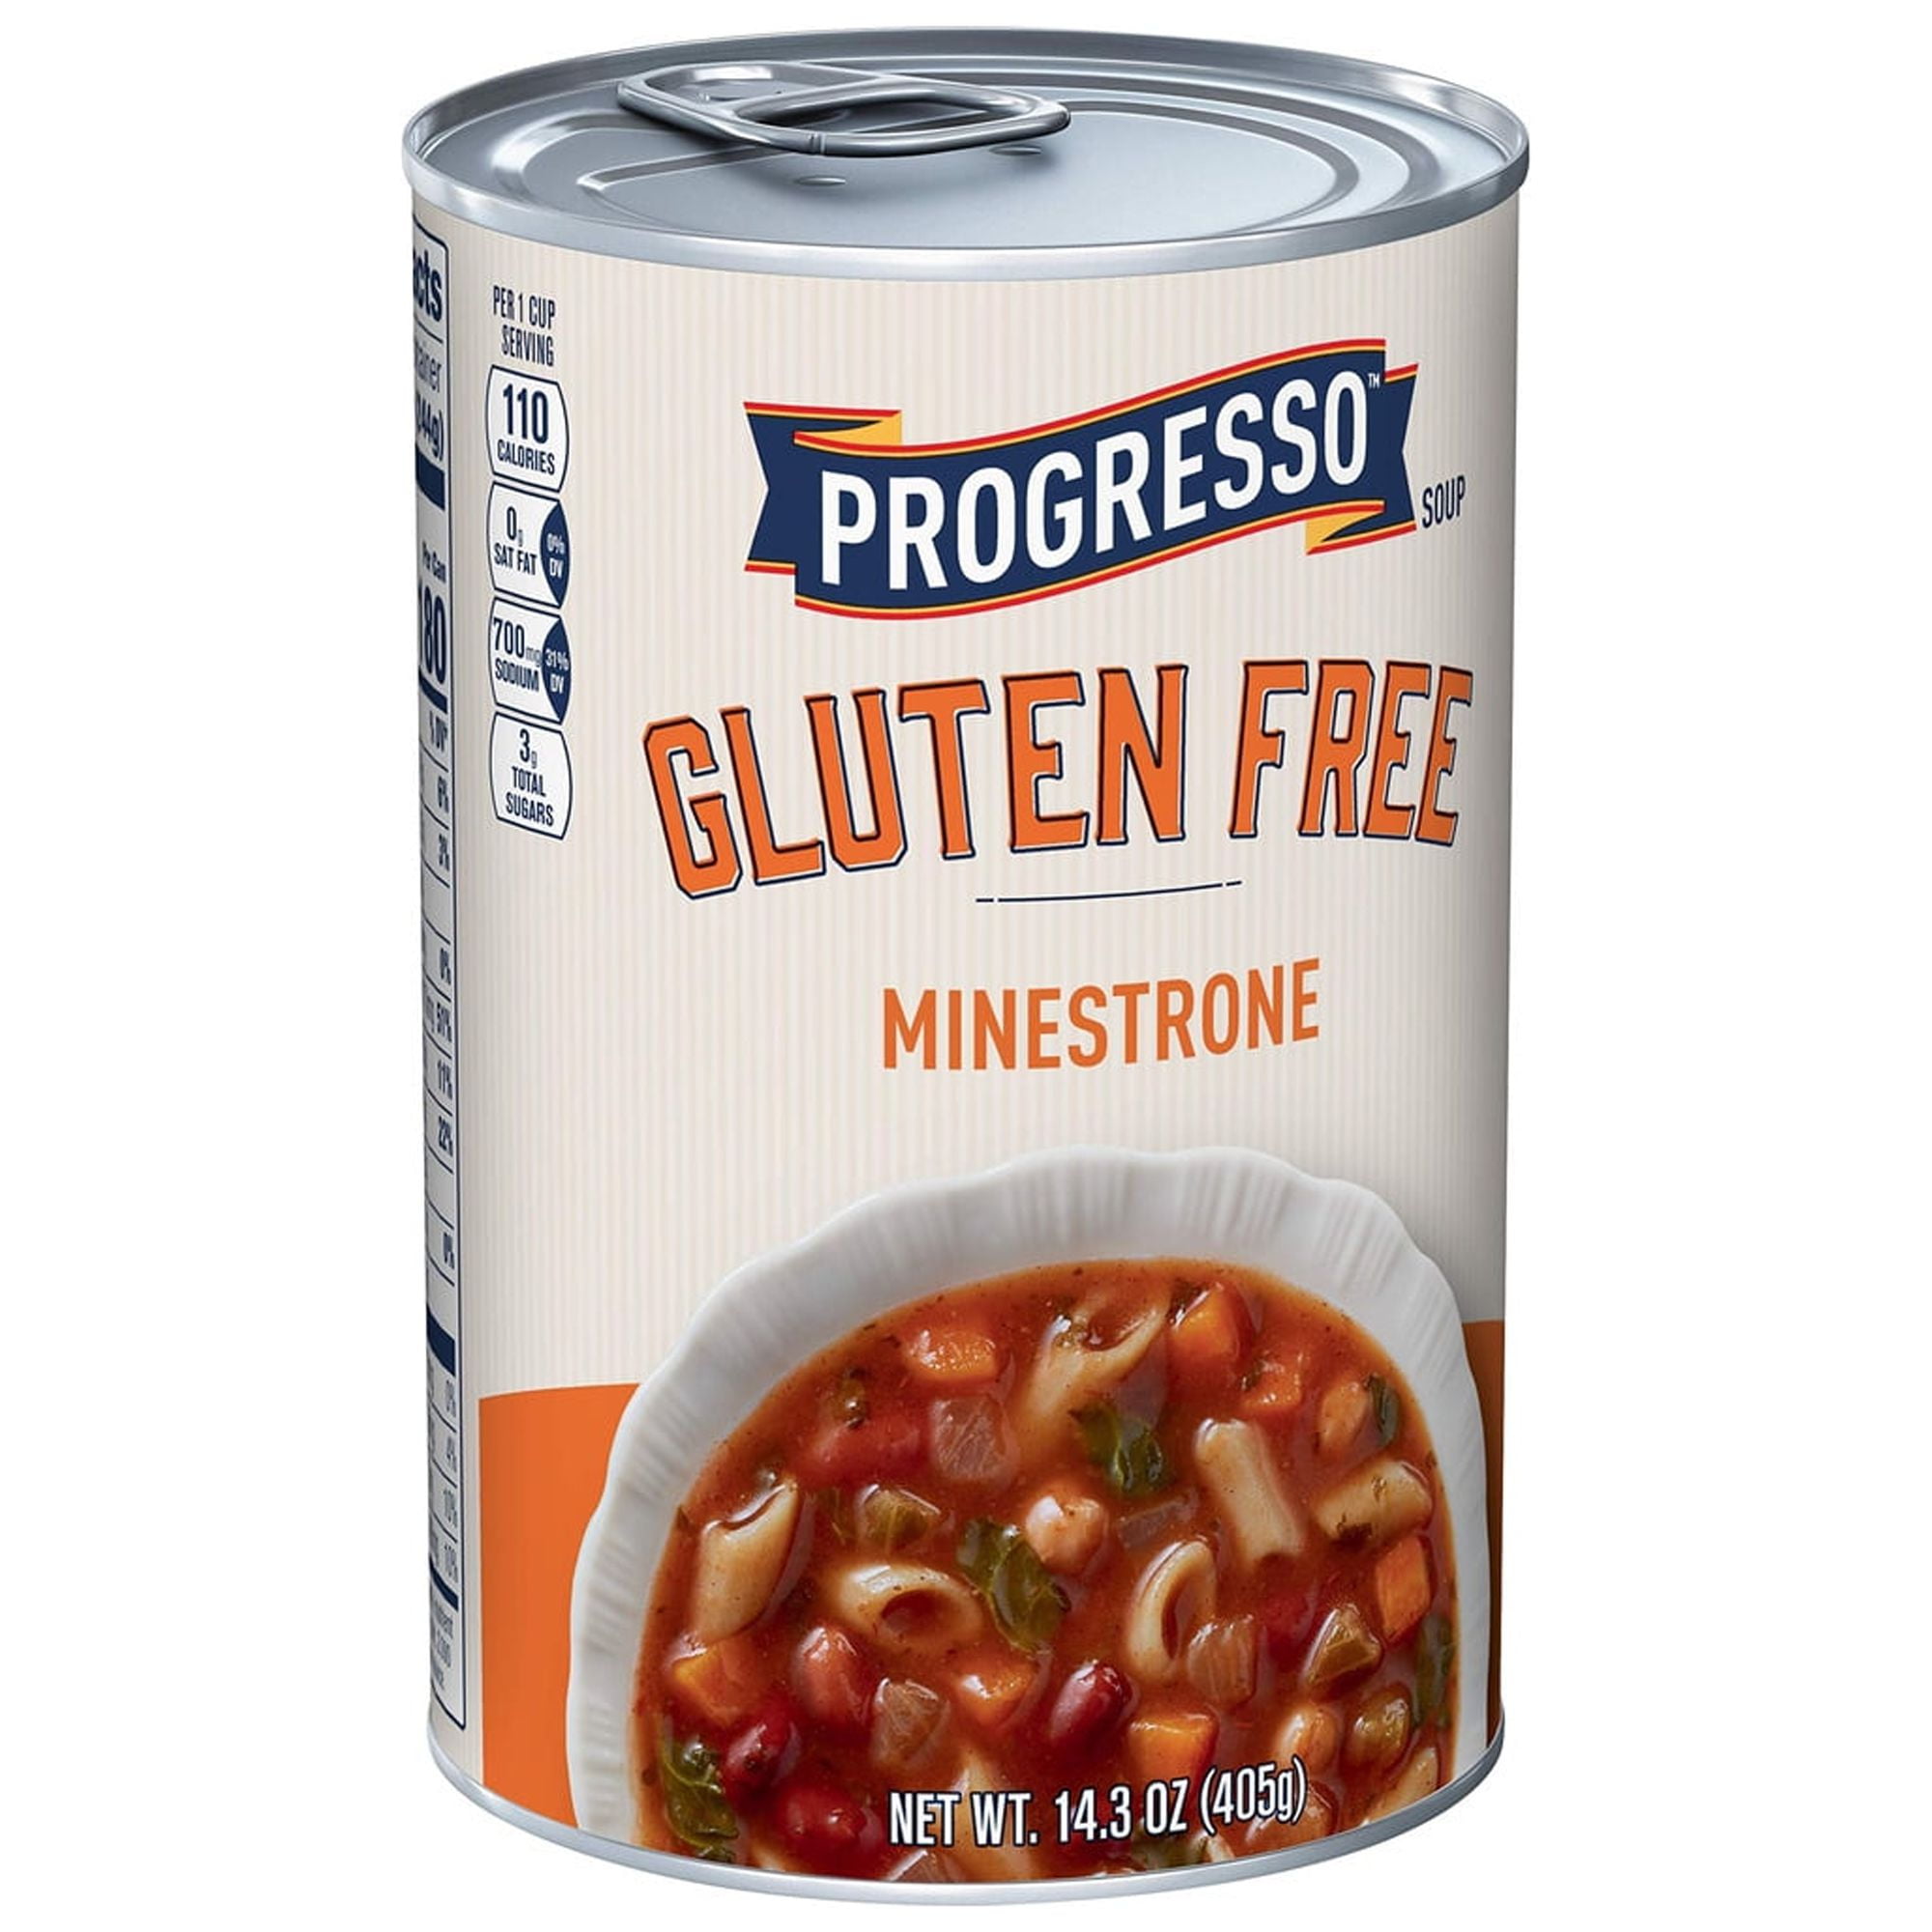 LeGout® Minestrone Canned Soup 12 x 3 lb